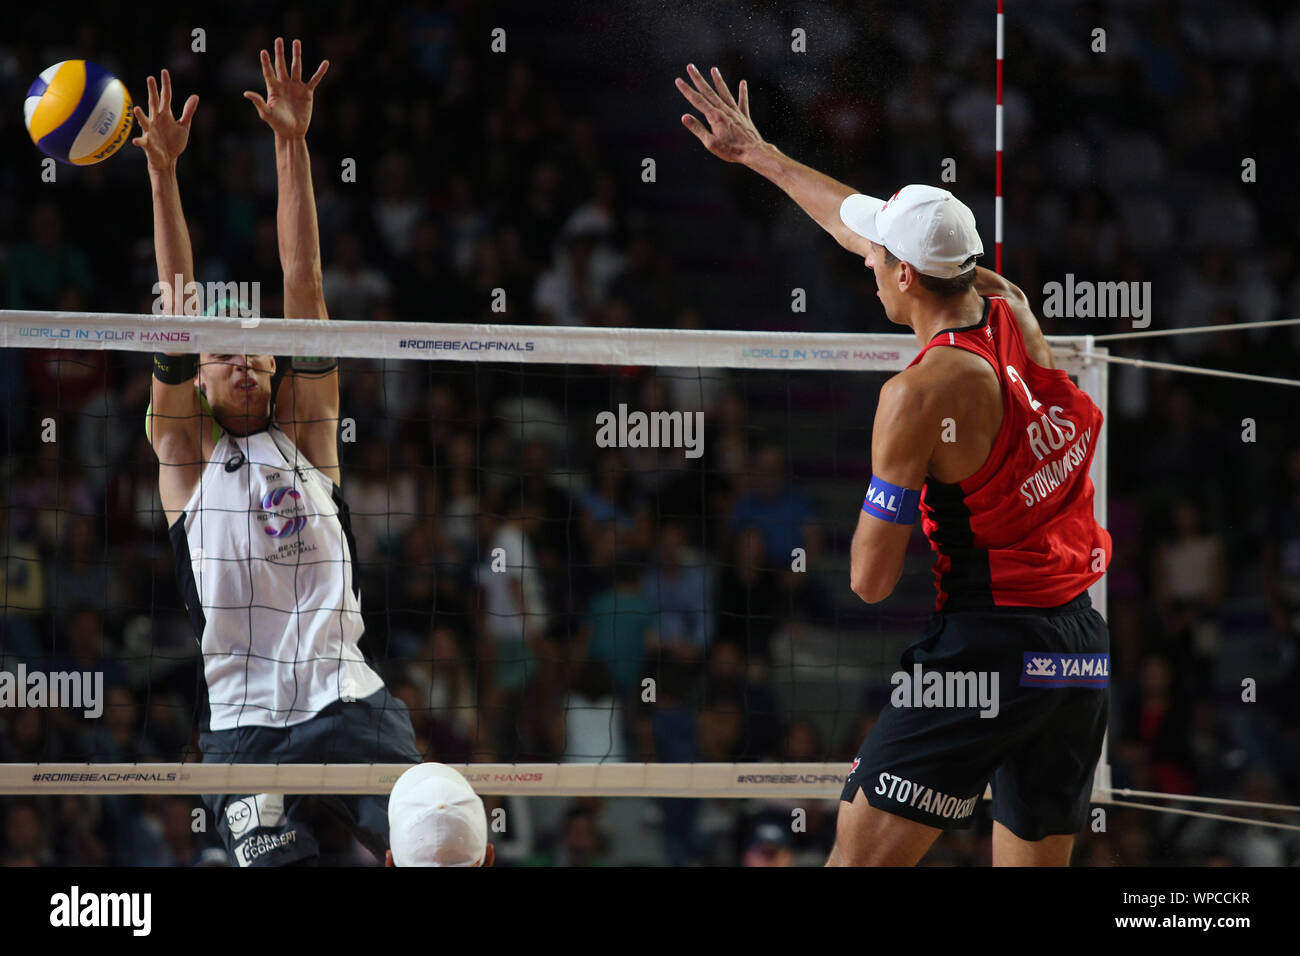 Rome, Italy. 08th Sep, 2019. Rome, Italy - September 08, 2019:KRASILNIKOV/STOYANOVSKIY and THOLE/WICKLER during the Final Men World Tour Rome Beach Volley Finals 2018/2019, Olympic qualifiers match Russian vs Germany, at Rome Tennis Stadium. Credit: Independent Photo Agency/Alamy Live News Stock Photo